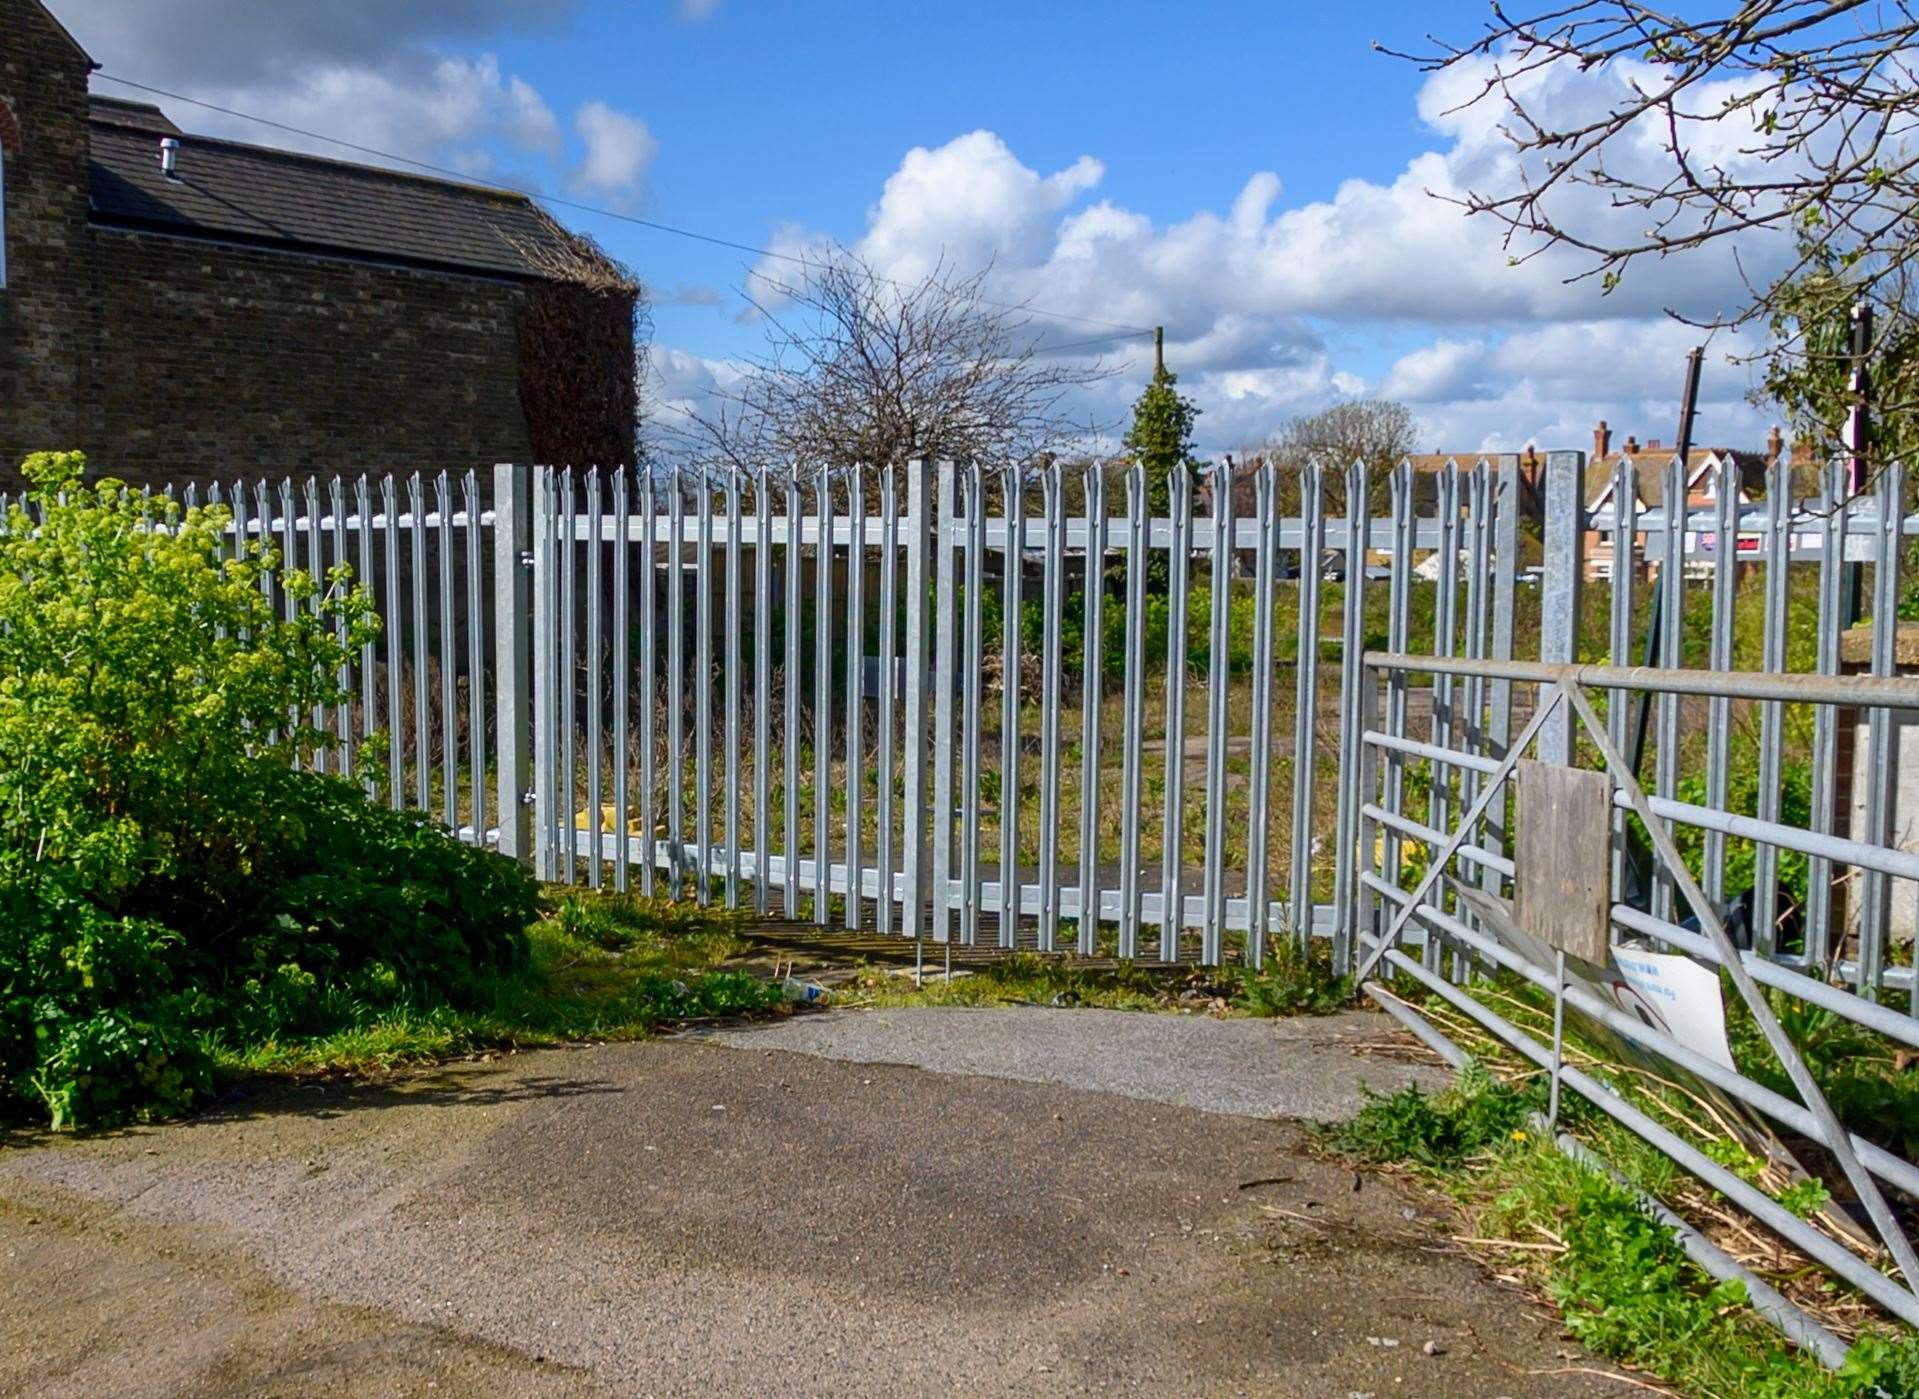 Canterbury City Council erected spiked metal gates at the entrance to Kent Close in Beacon Road, Canterbury. Picture: Pete's Photography, Herne Bay